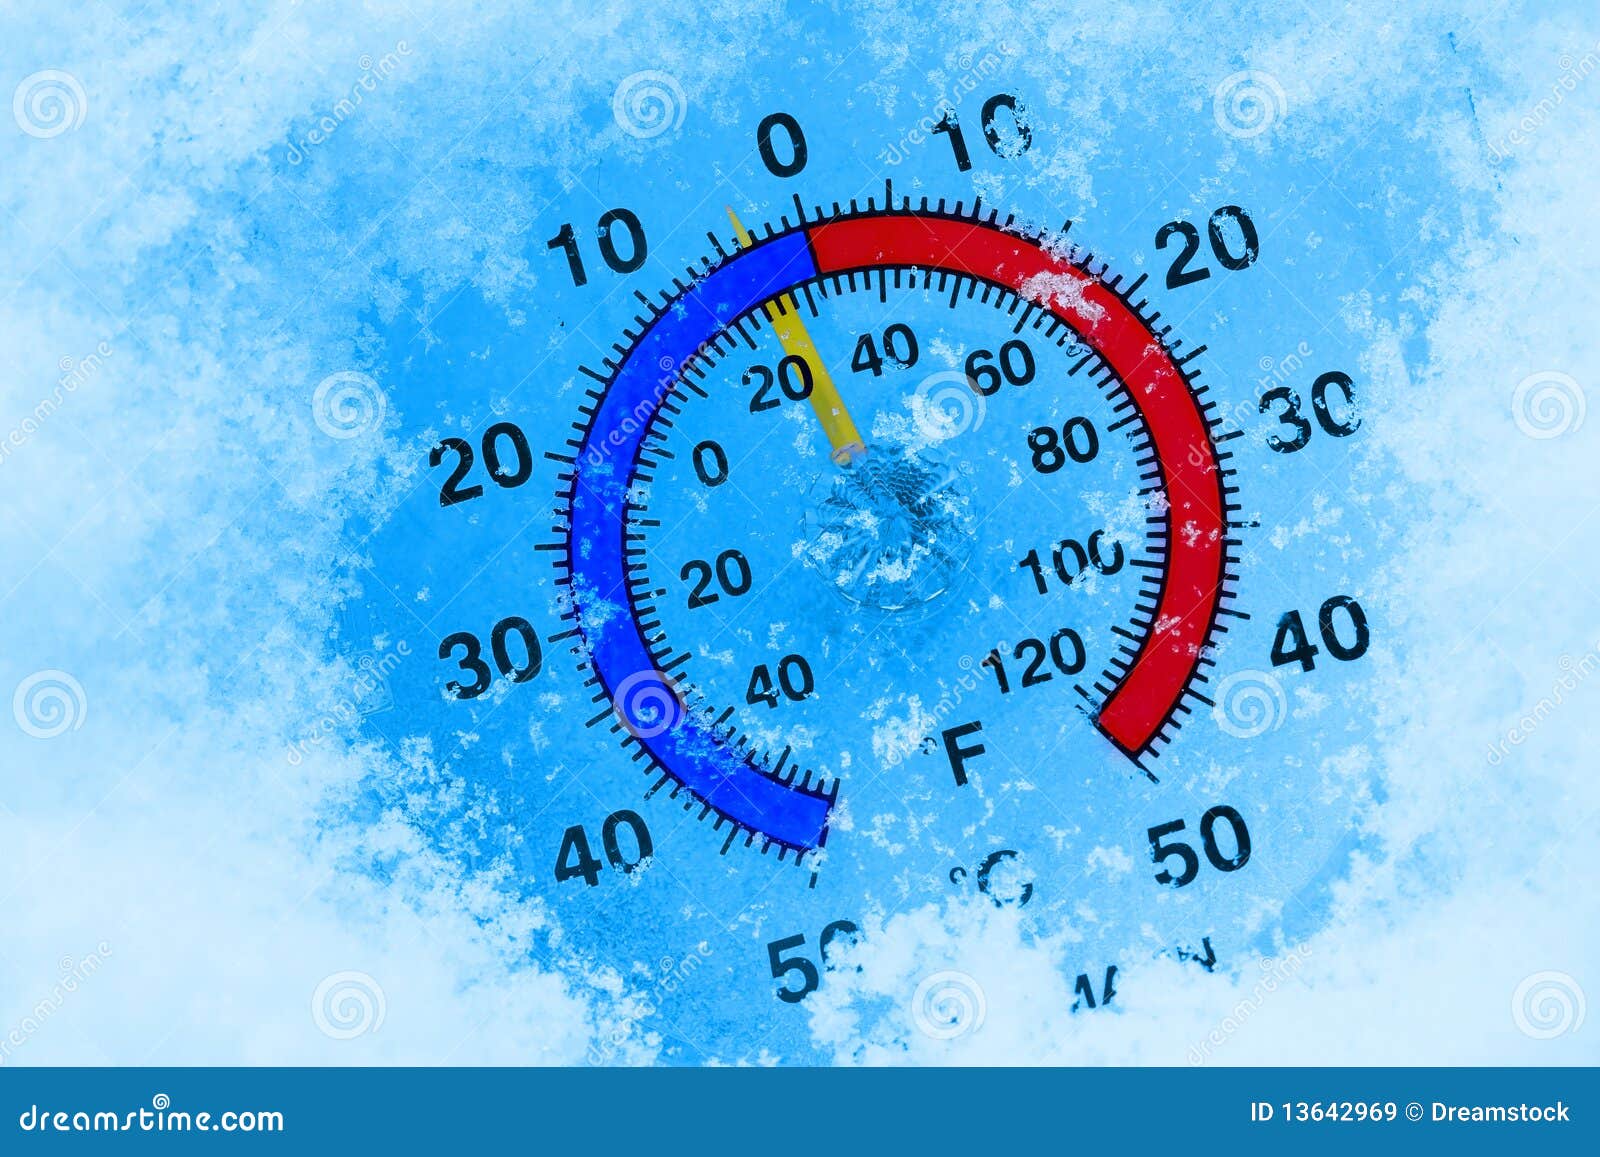 frozen-thermometer-13642969.jpg